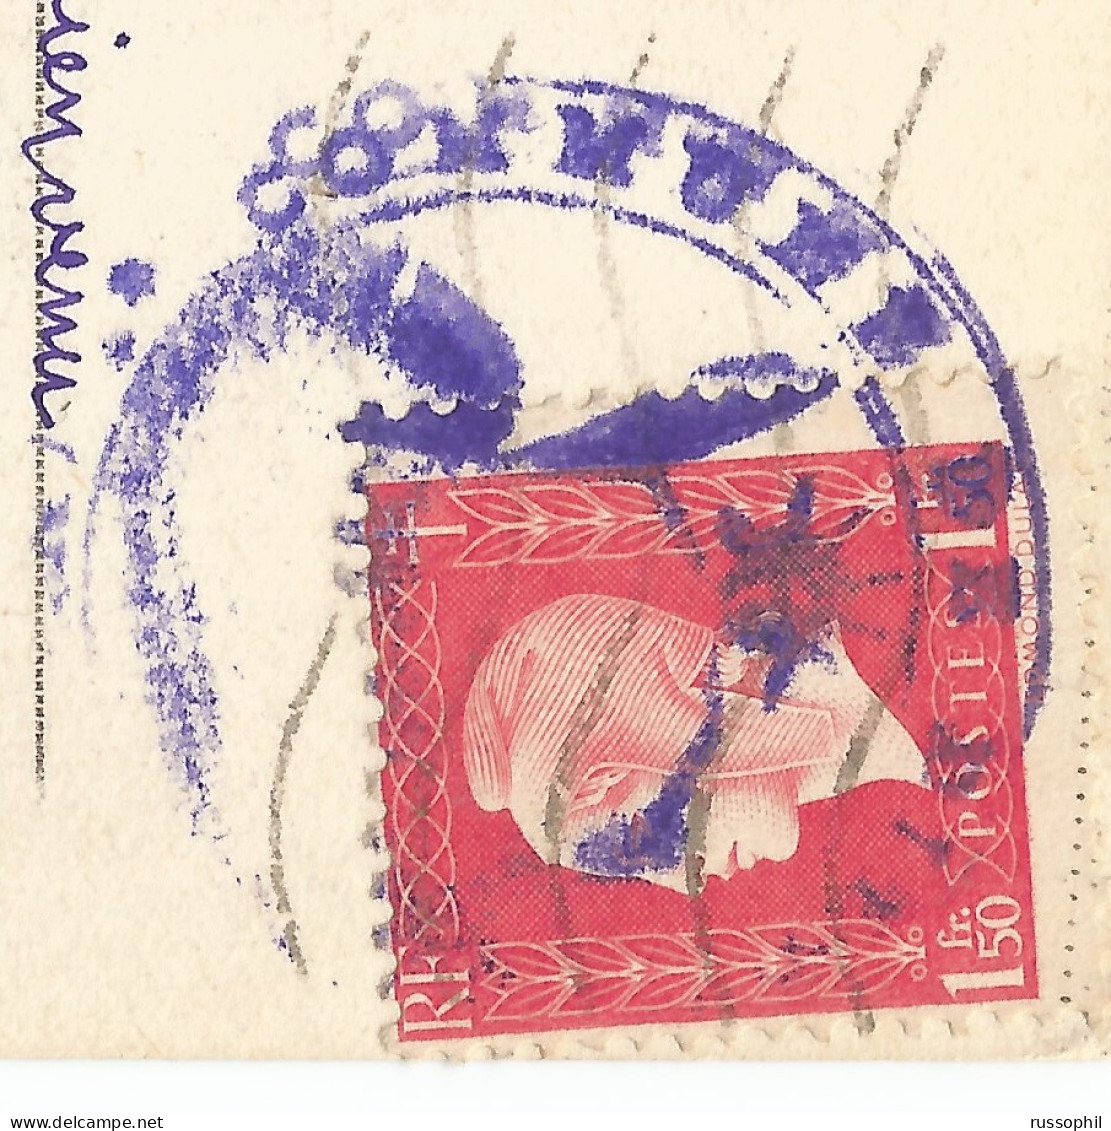 FRANCE - VARIETY &  CURIOSITY - Yv. #691 ALONE ON PC - STAMP OF THE TOWN HALL OF DIENNES (58) AS ARRIVAL MARK - 1945  - Brieven En Documenten